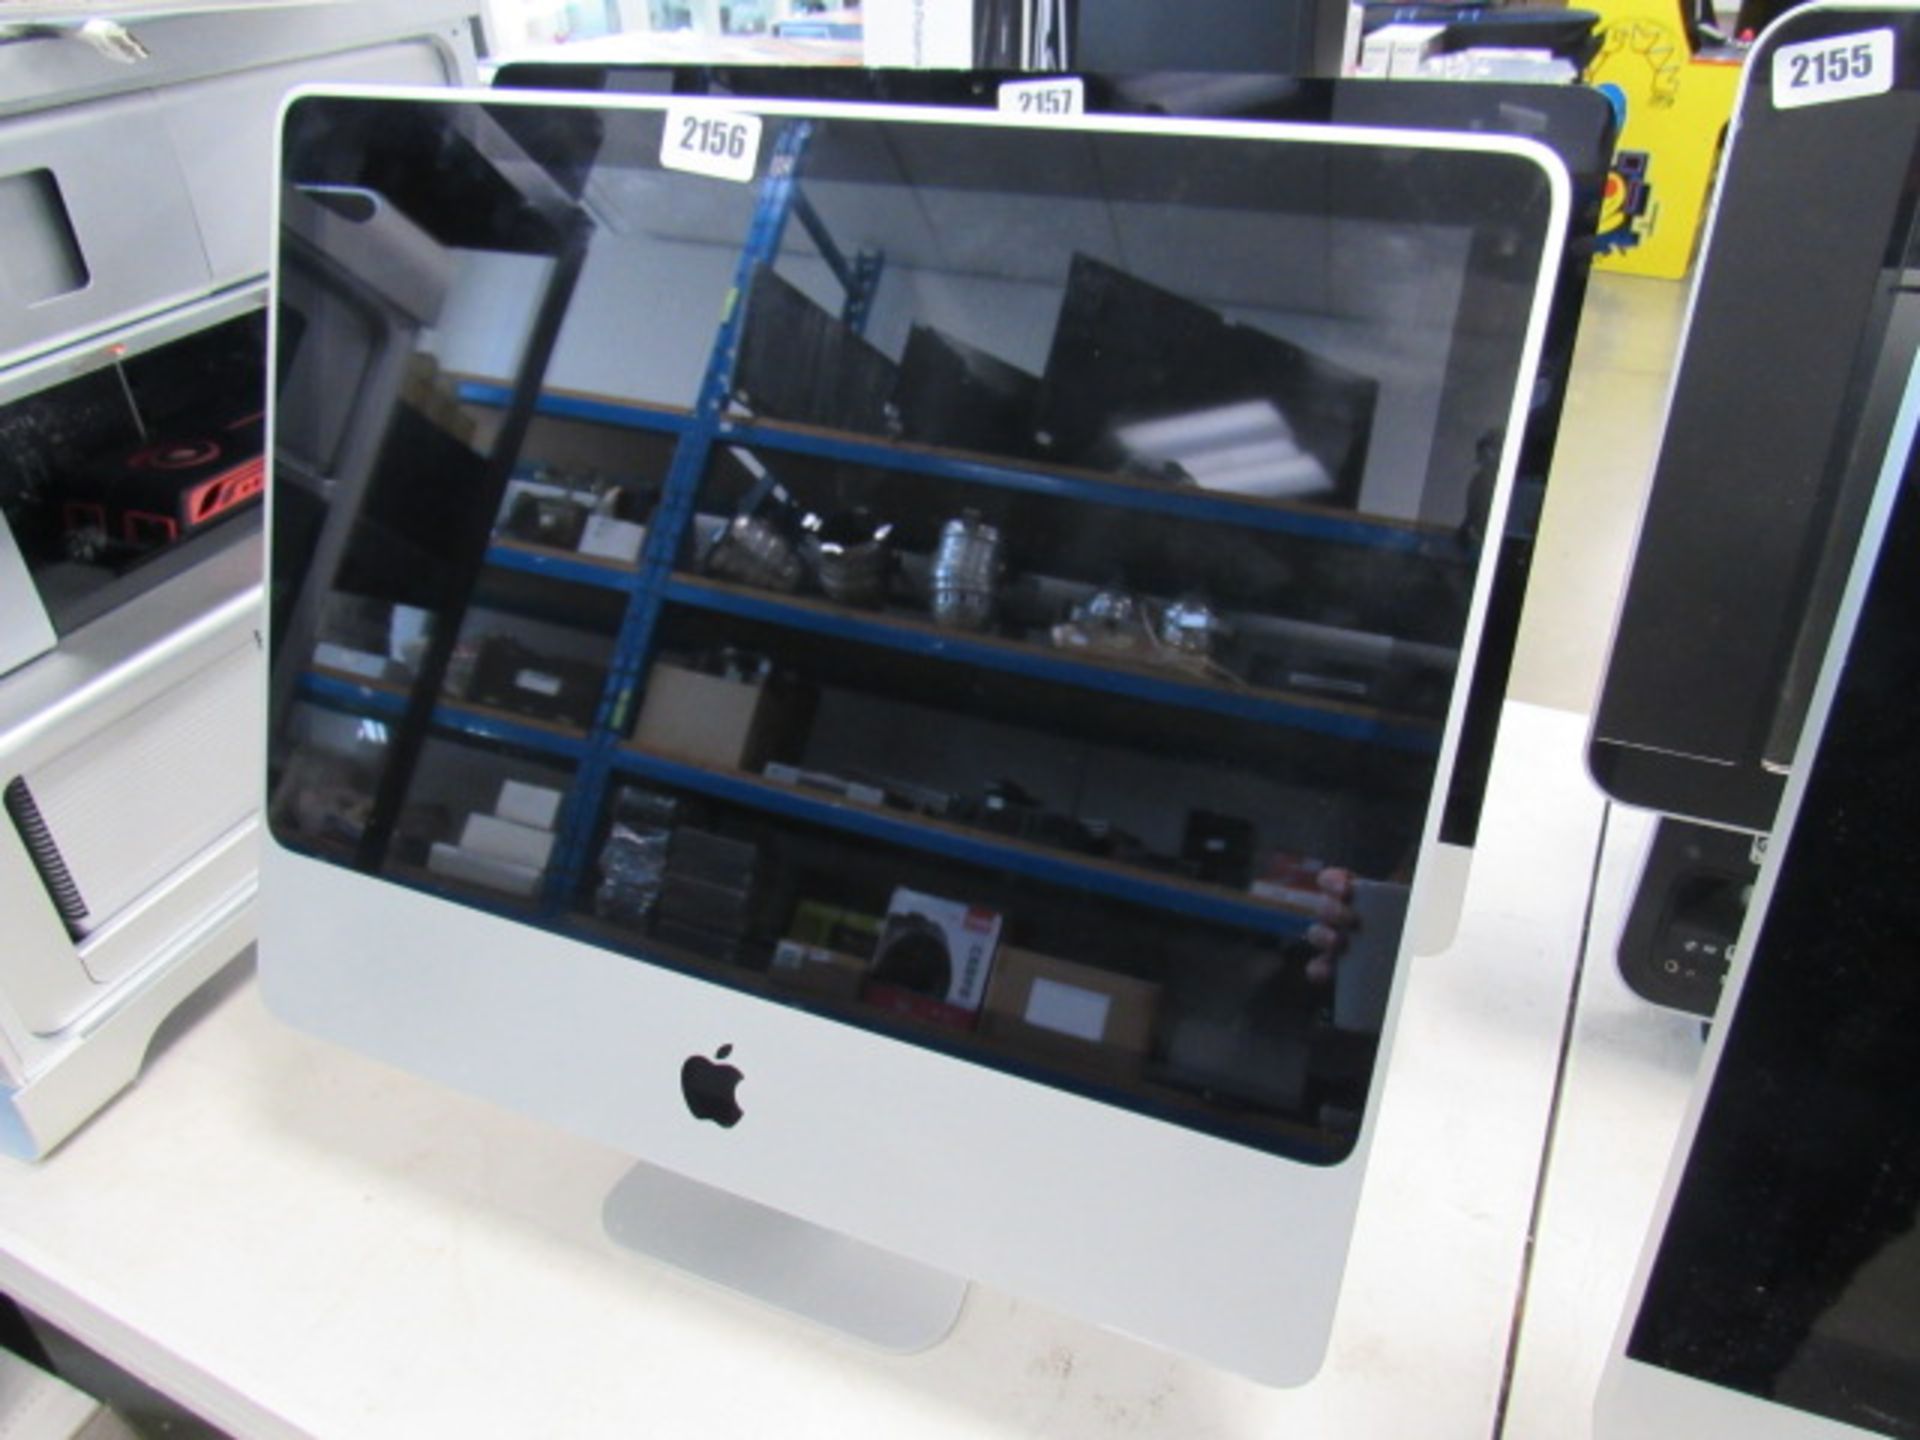 Apple iMac 20'' all in one computer (no accessories, sold for parts/repair)